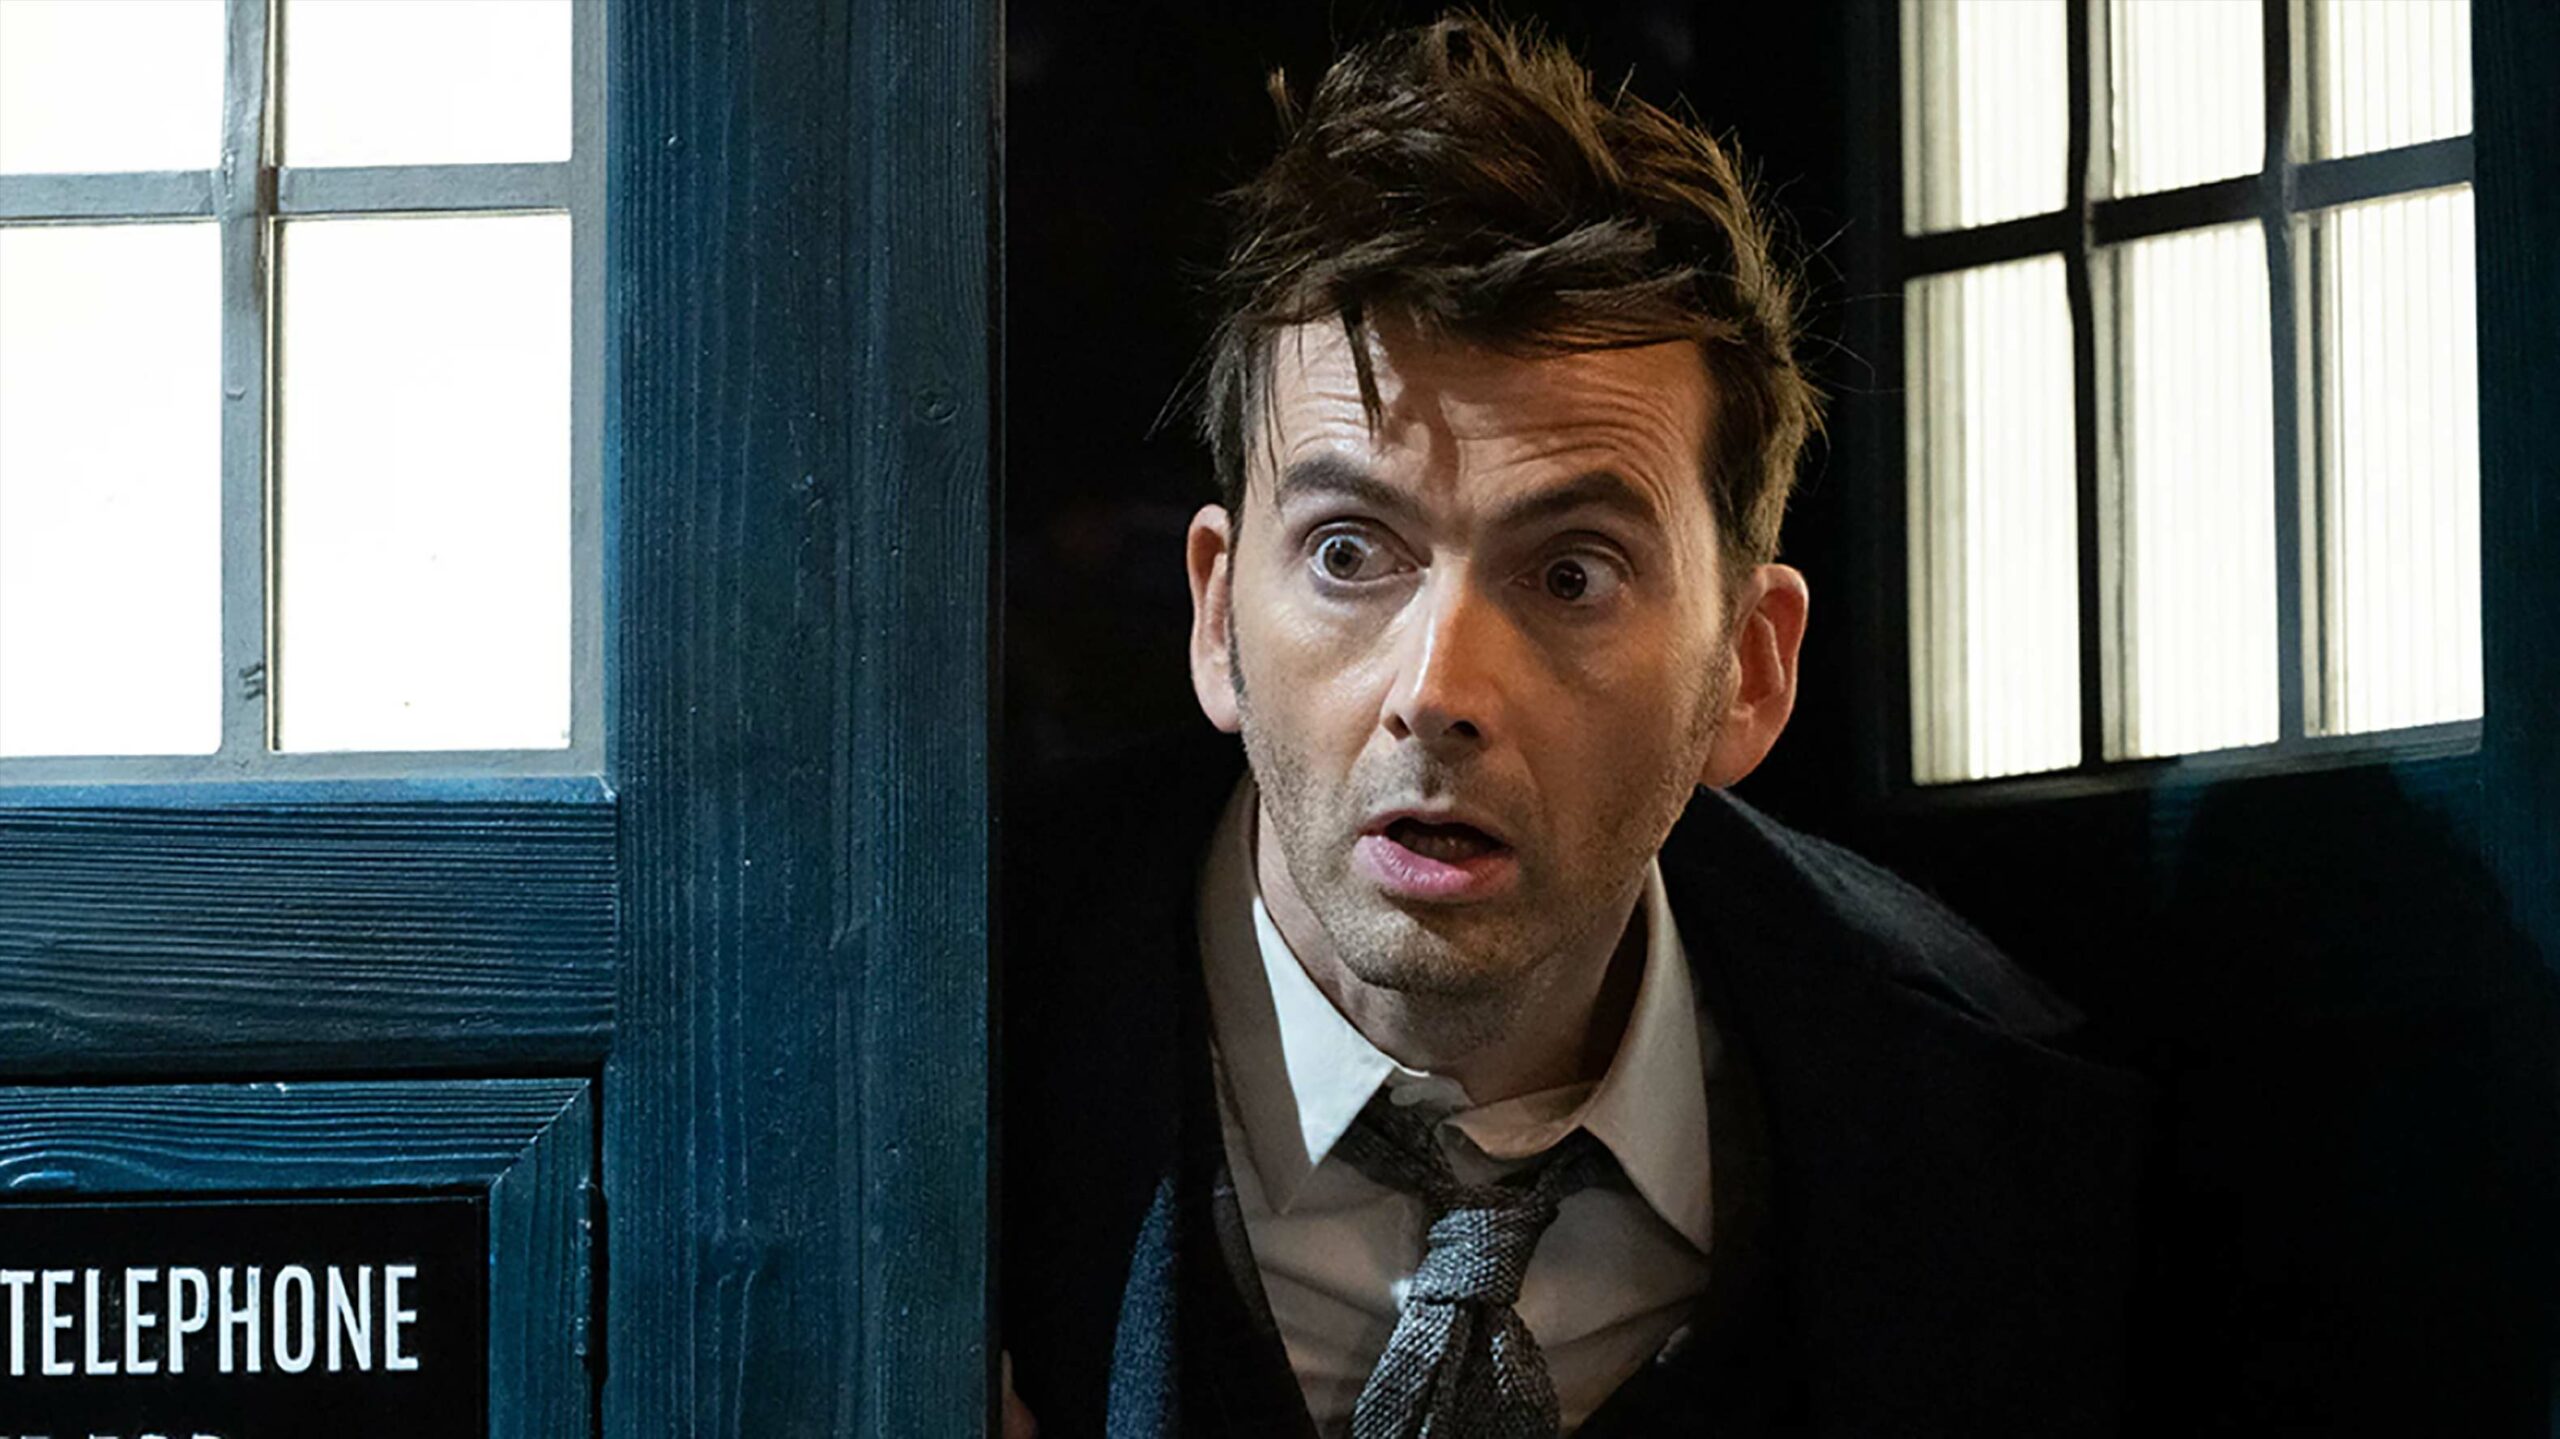 David Tennant as The Doctor in Doctor Who. He's looking out of a telephone box looking surprised.